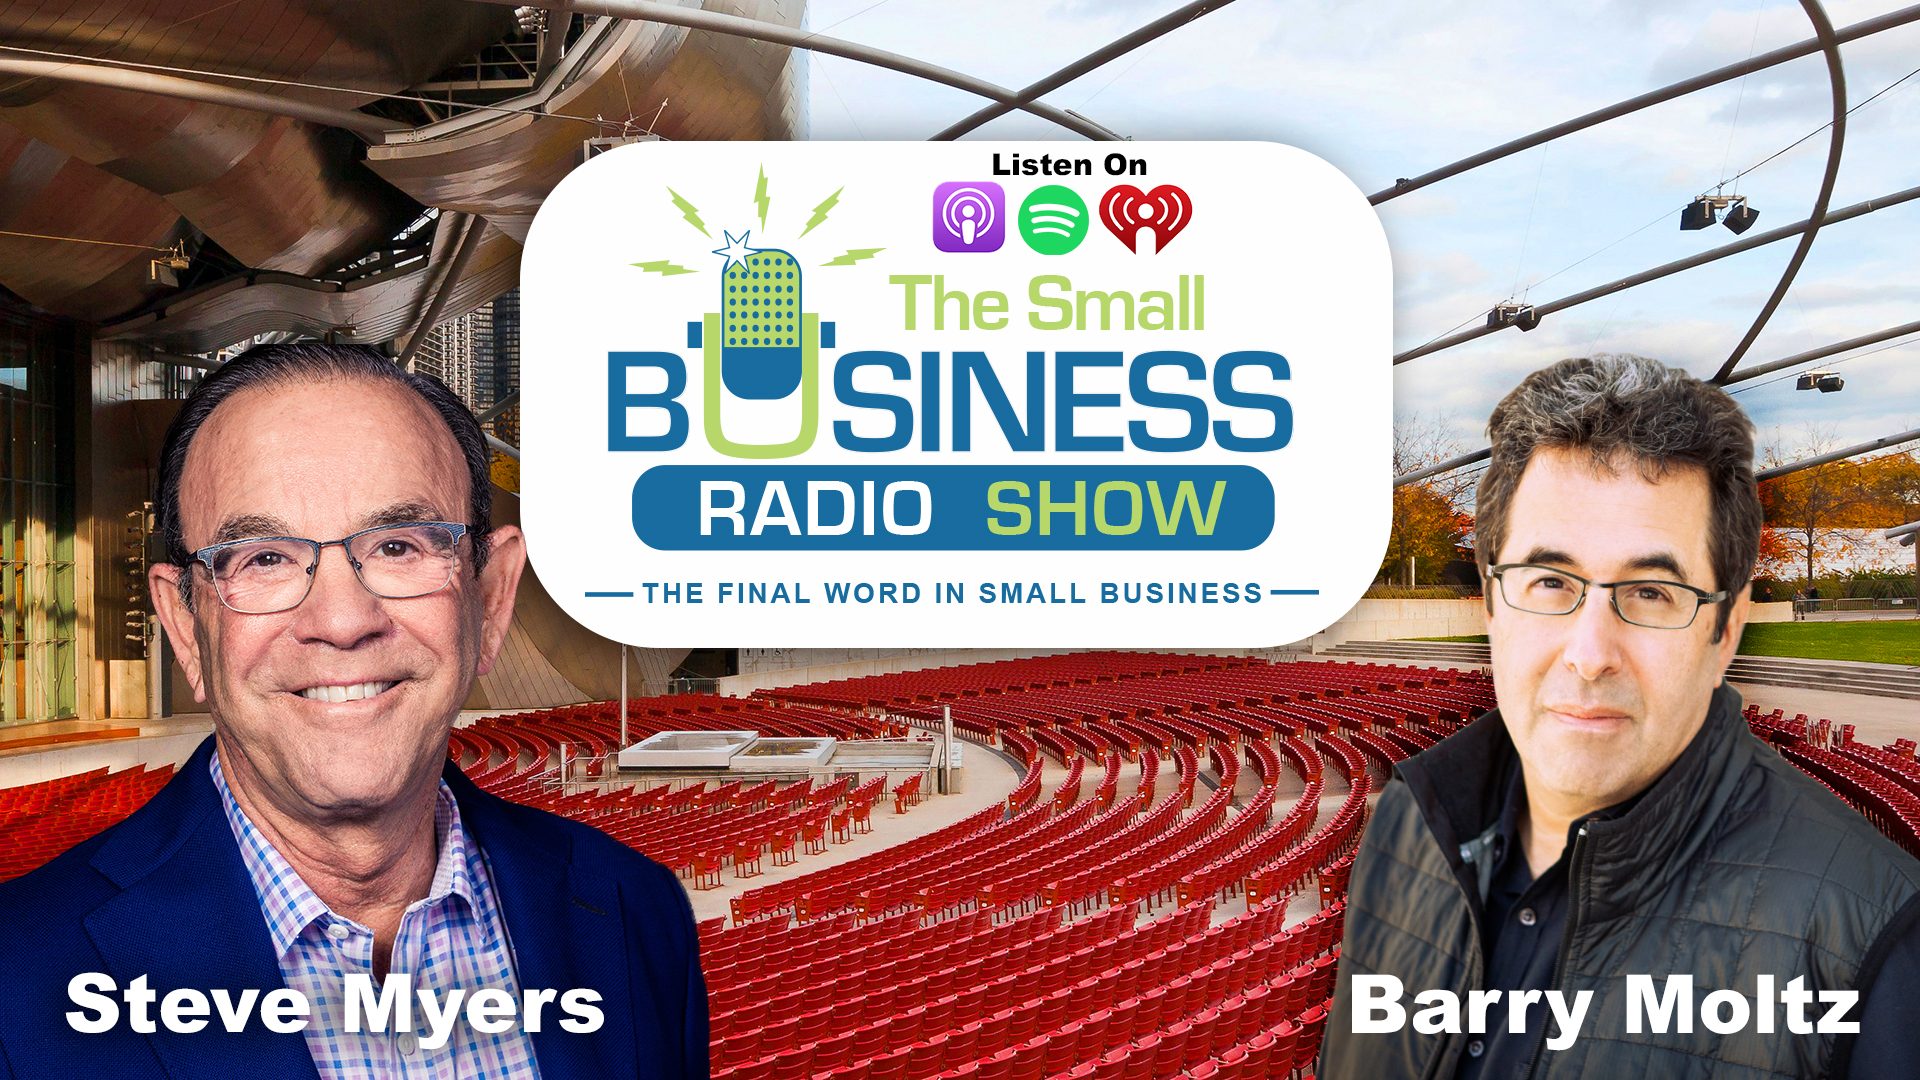 Steve Myers on The Small Business Radio Show